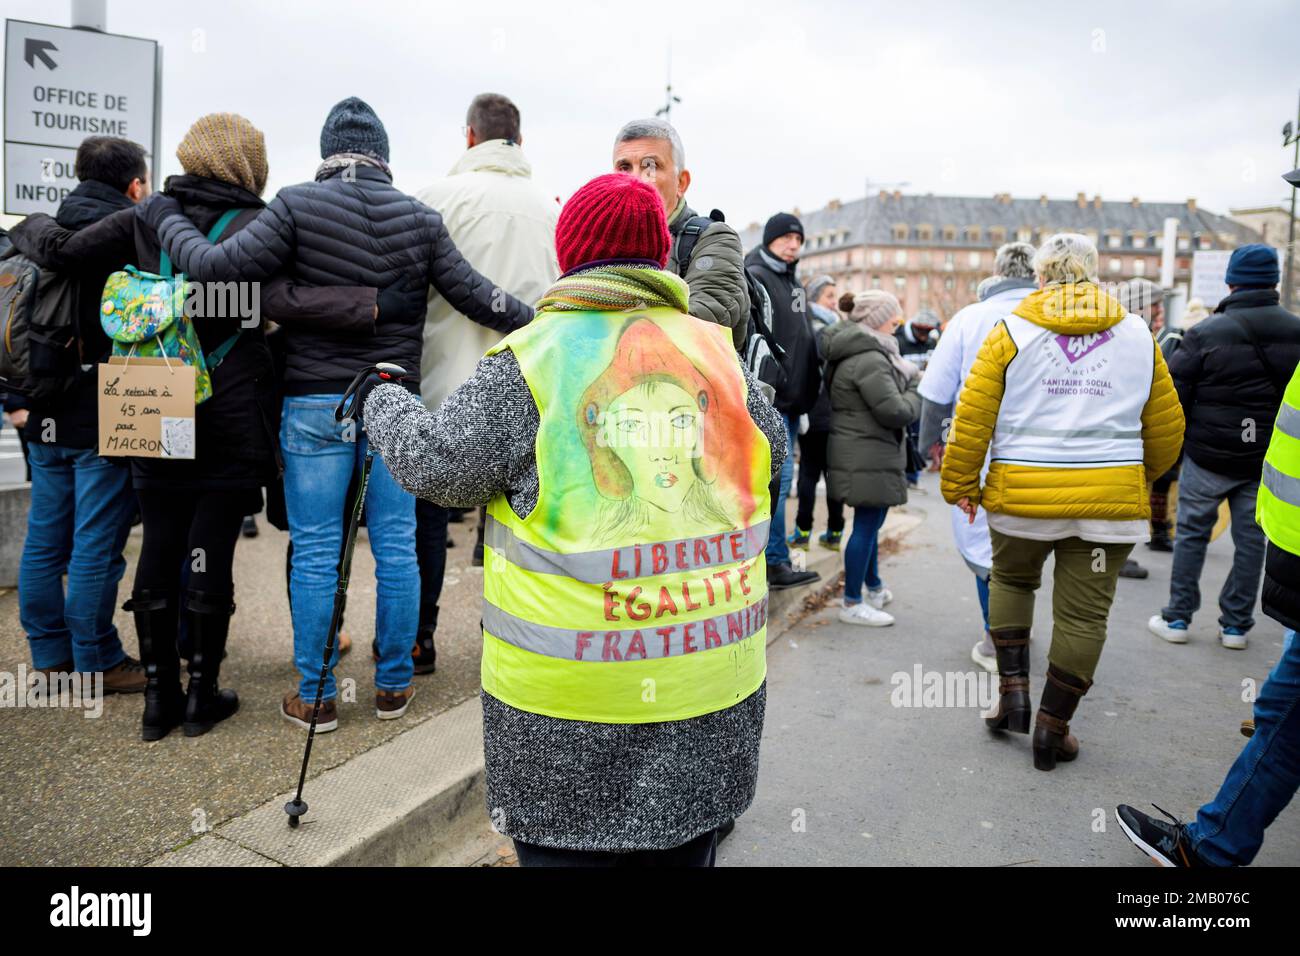 Strasbourg, France - Jan 19, 2023: Liberte Egalite Fraternite on woman yellow vest at protest against the French government's planned pension reform to push the retirement age from 62 to 64 unions have called for mass social action Stock Photo